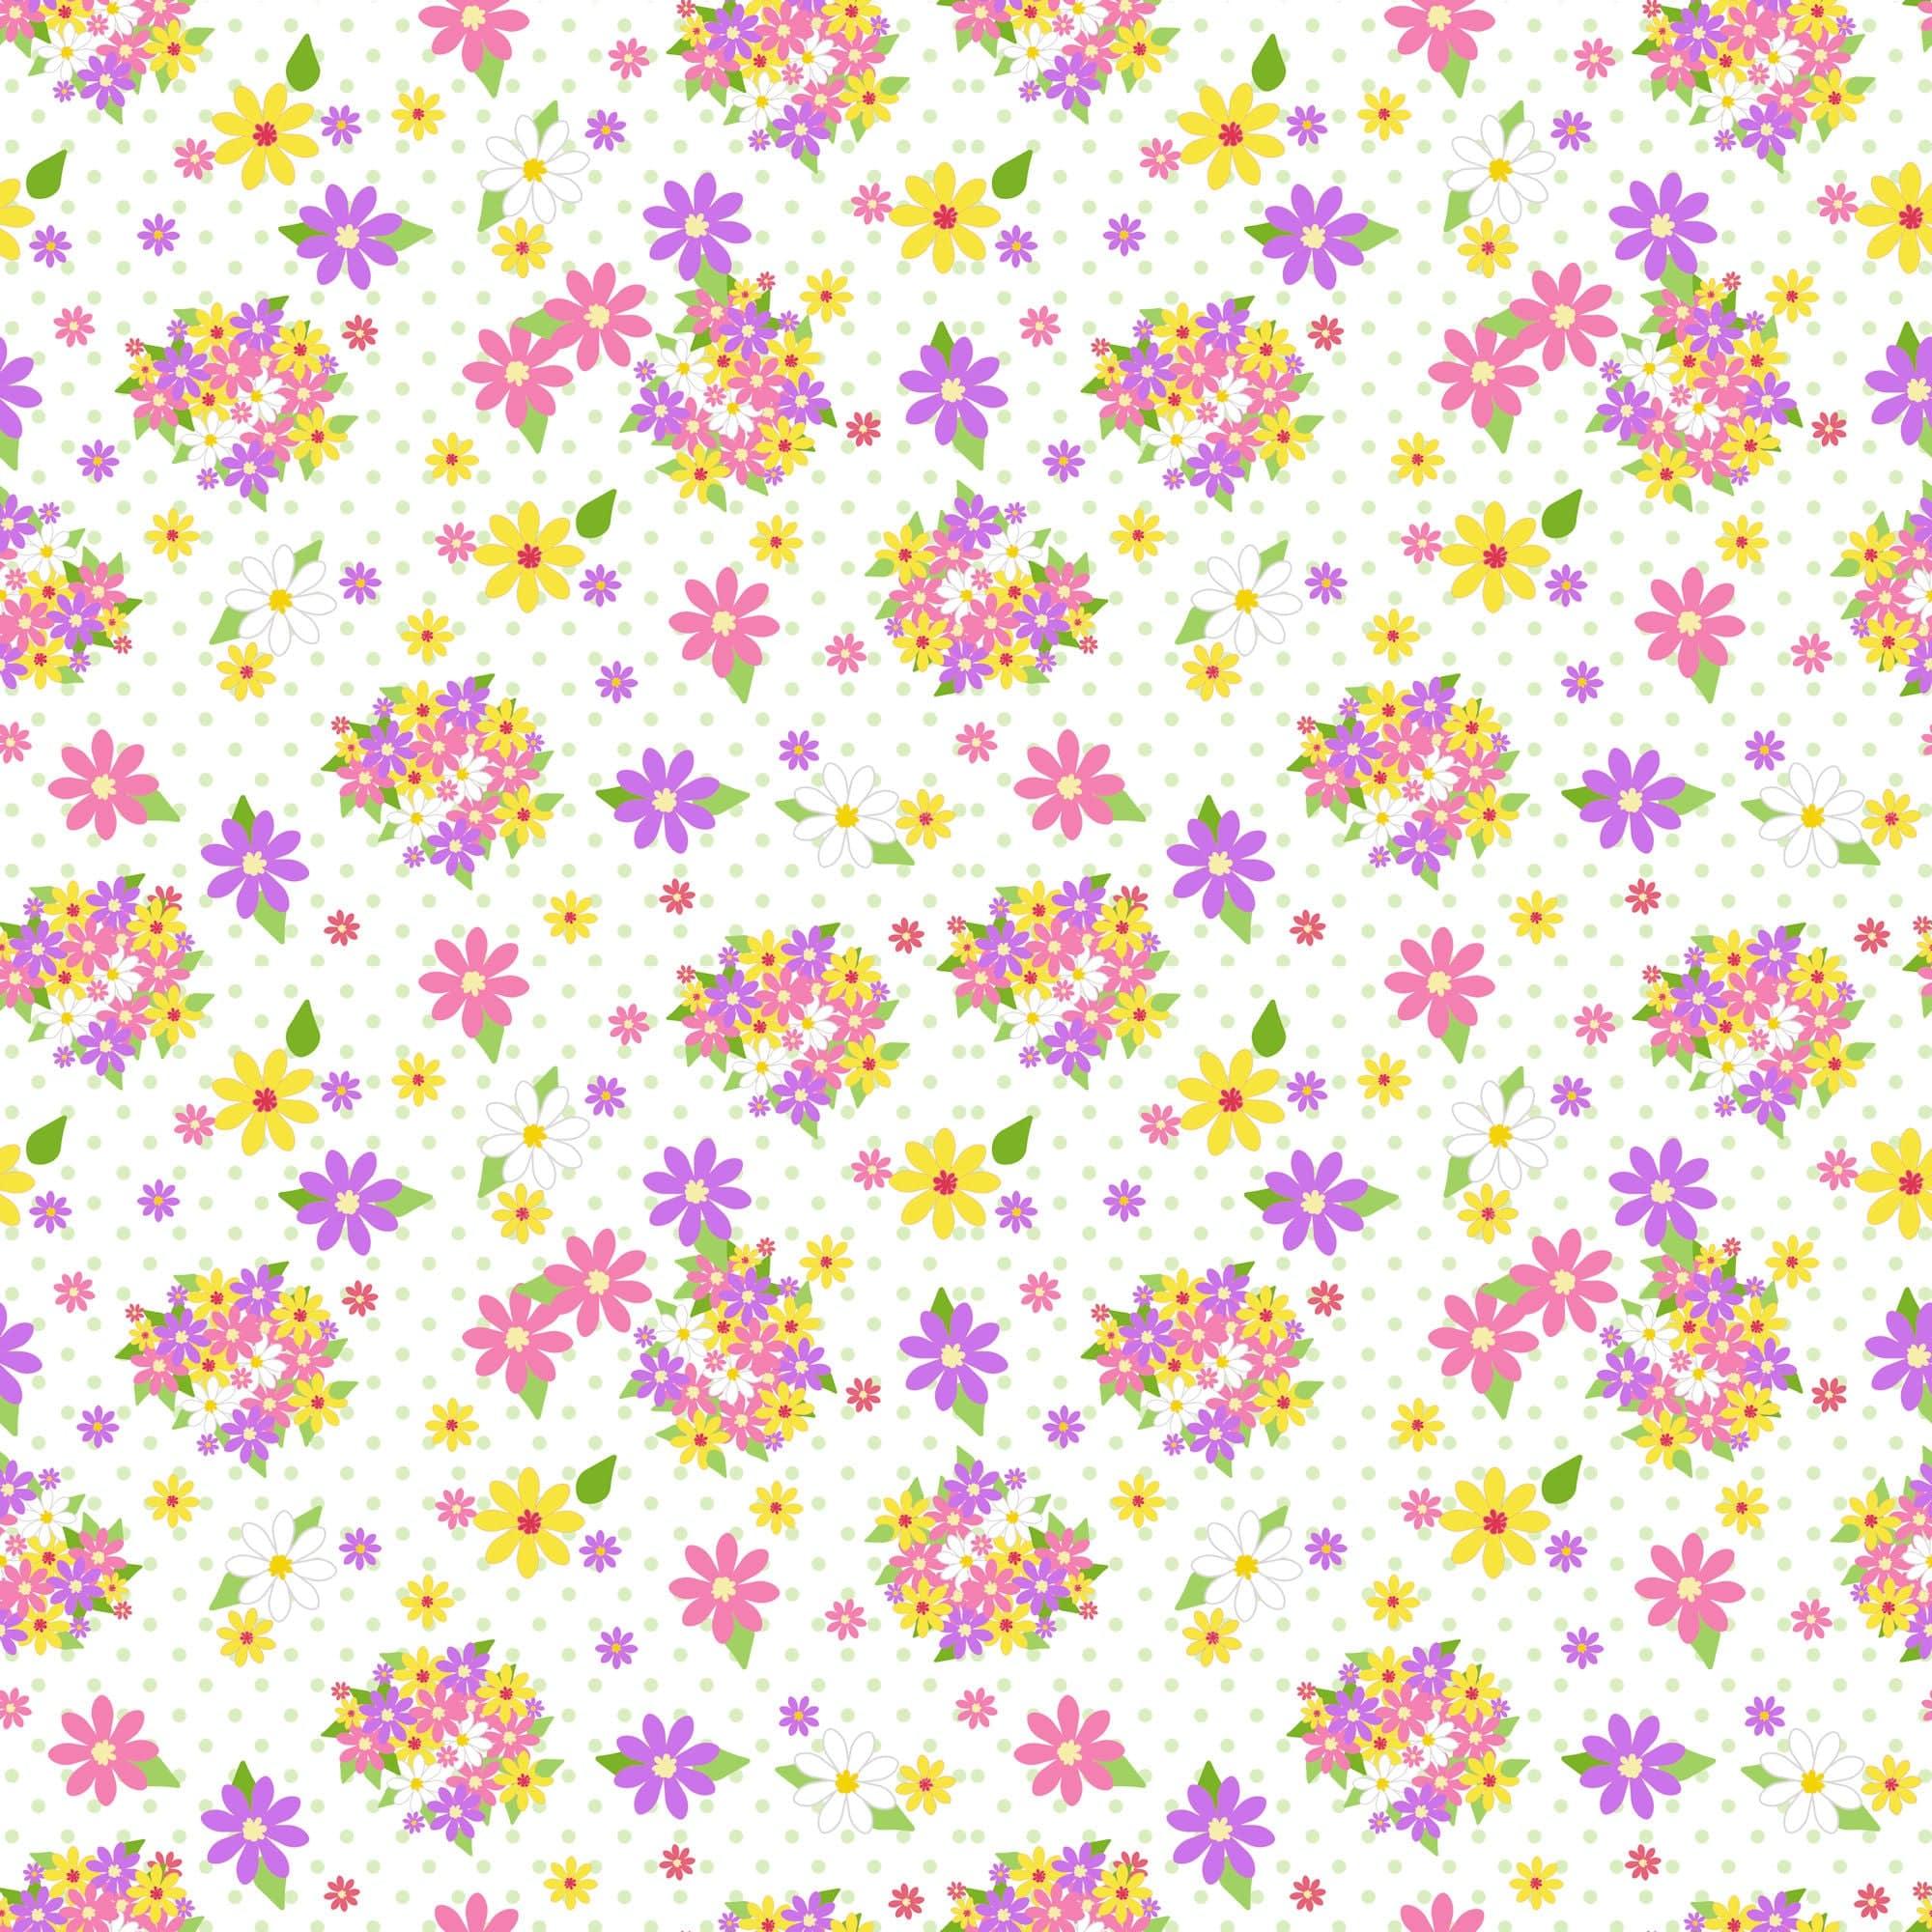 Mother's Day Collection Little Girl Love 12 x 12 Double-Sided Scrapbook Paper by SSC Designs